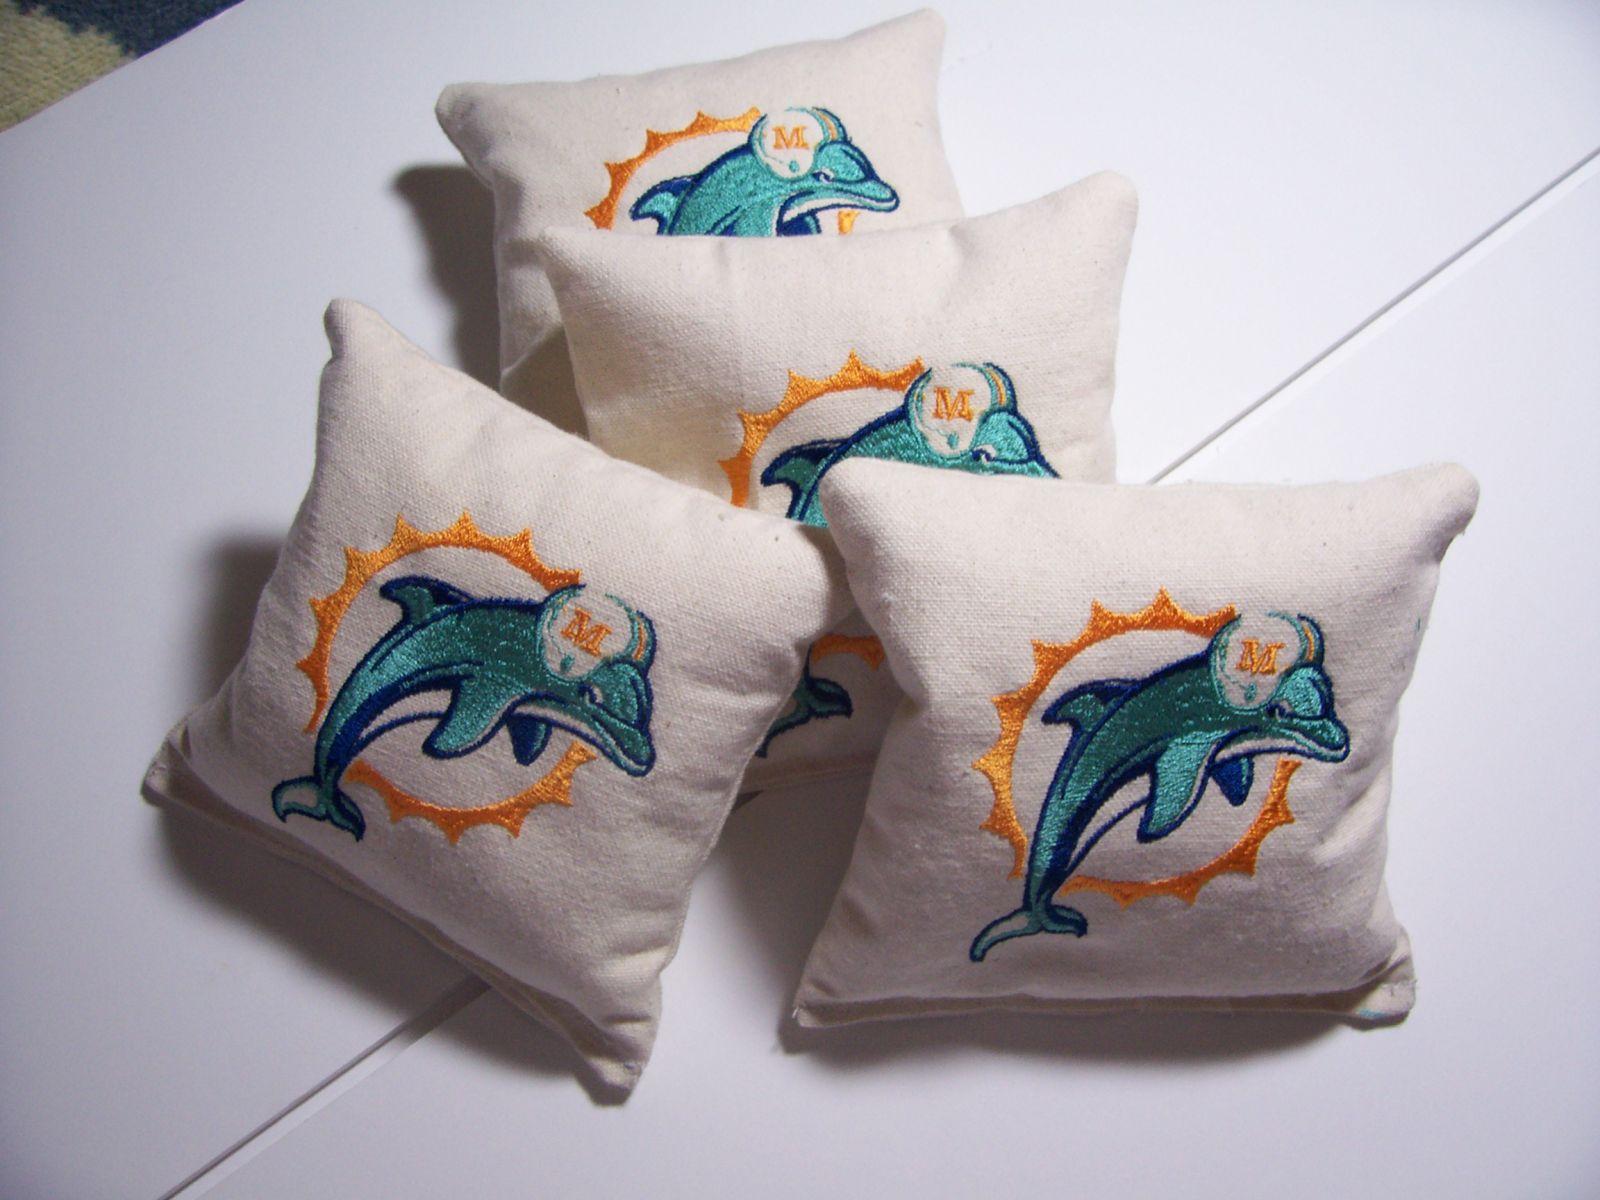 Miami Dolphins embroidered pillow